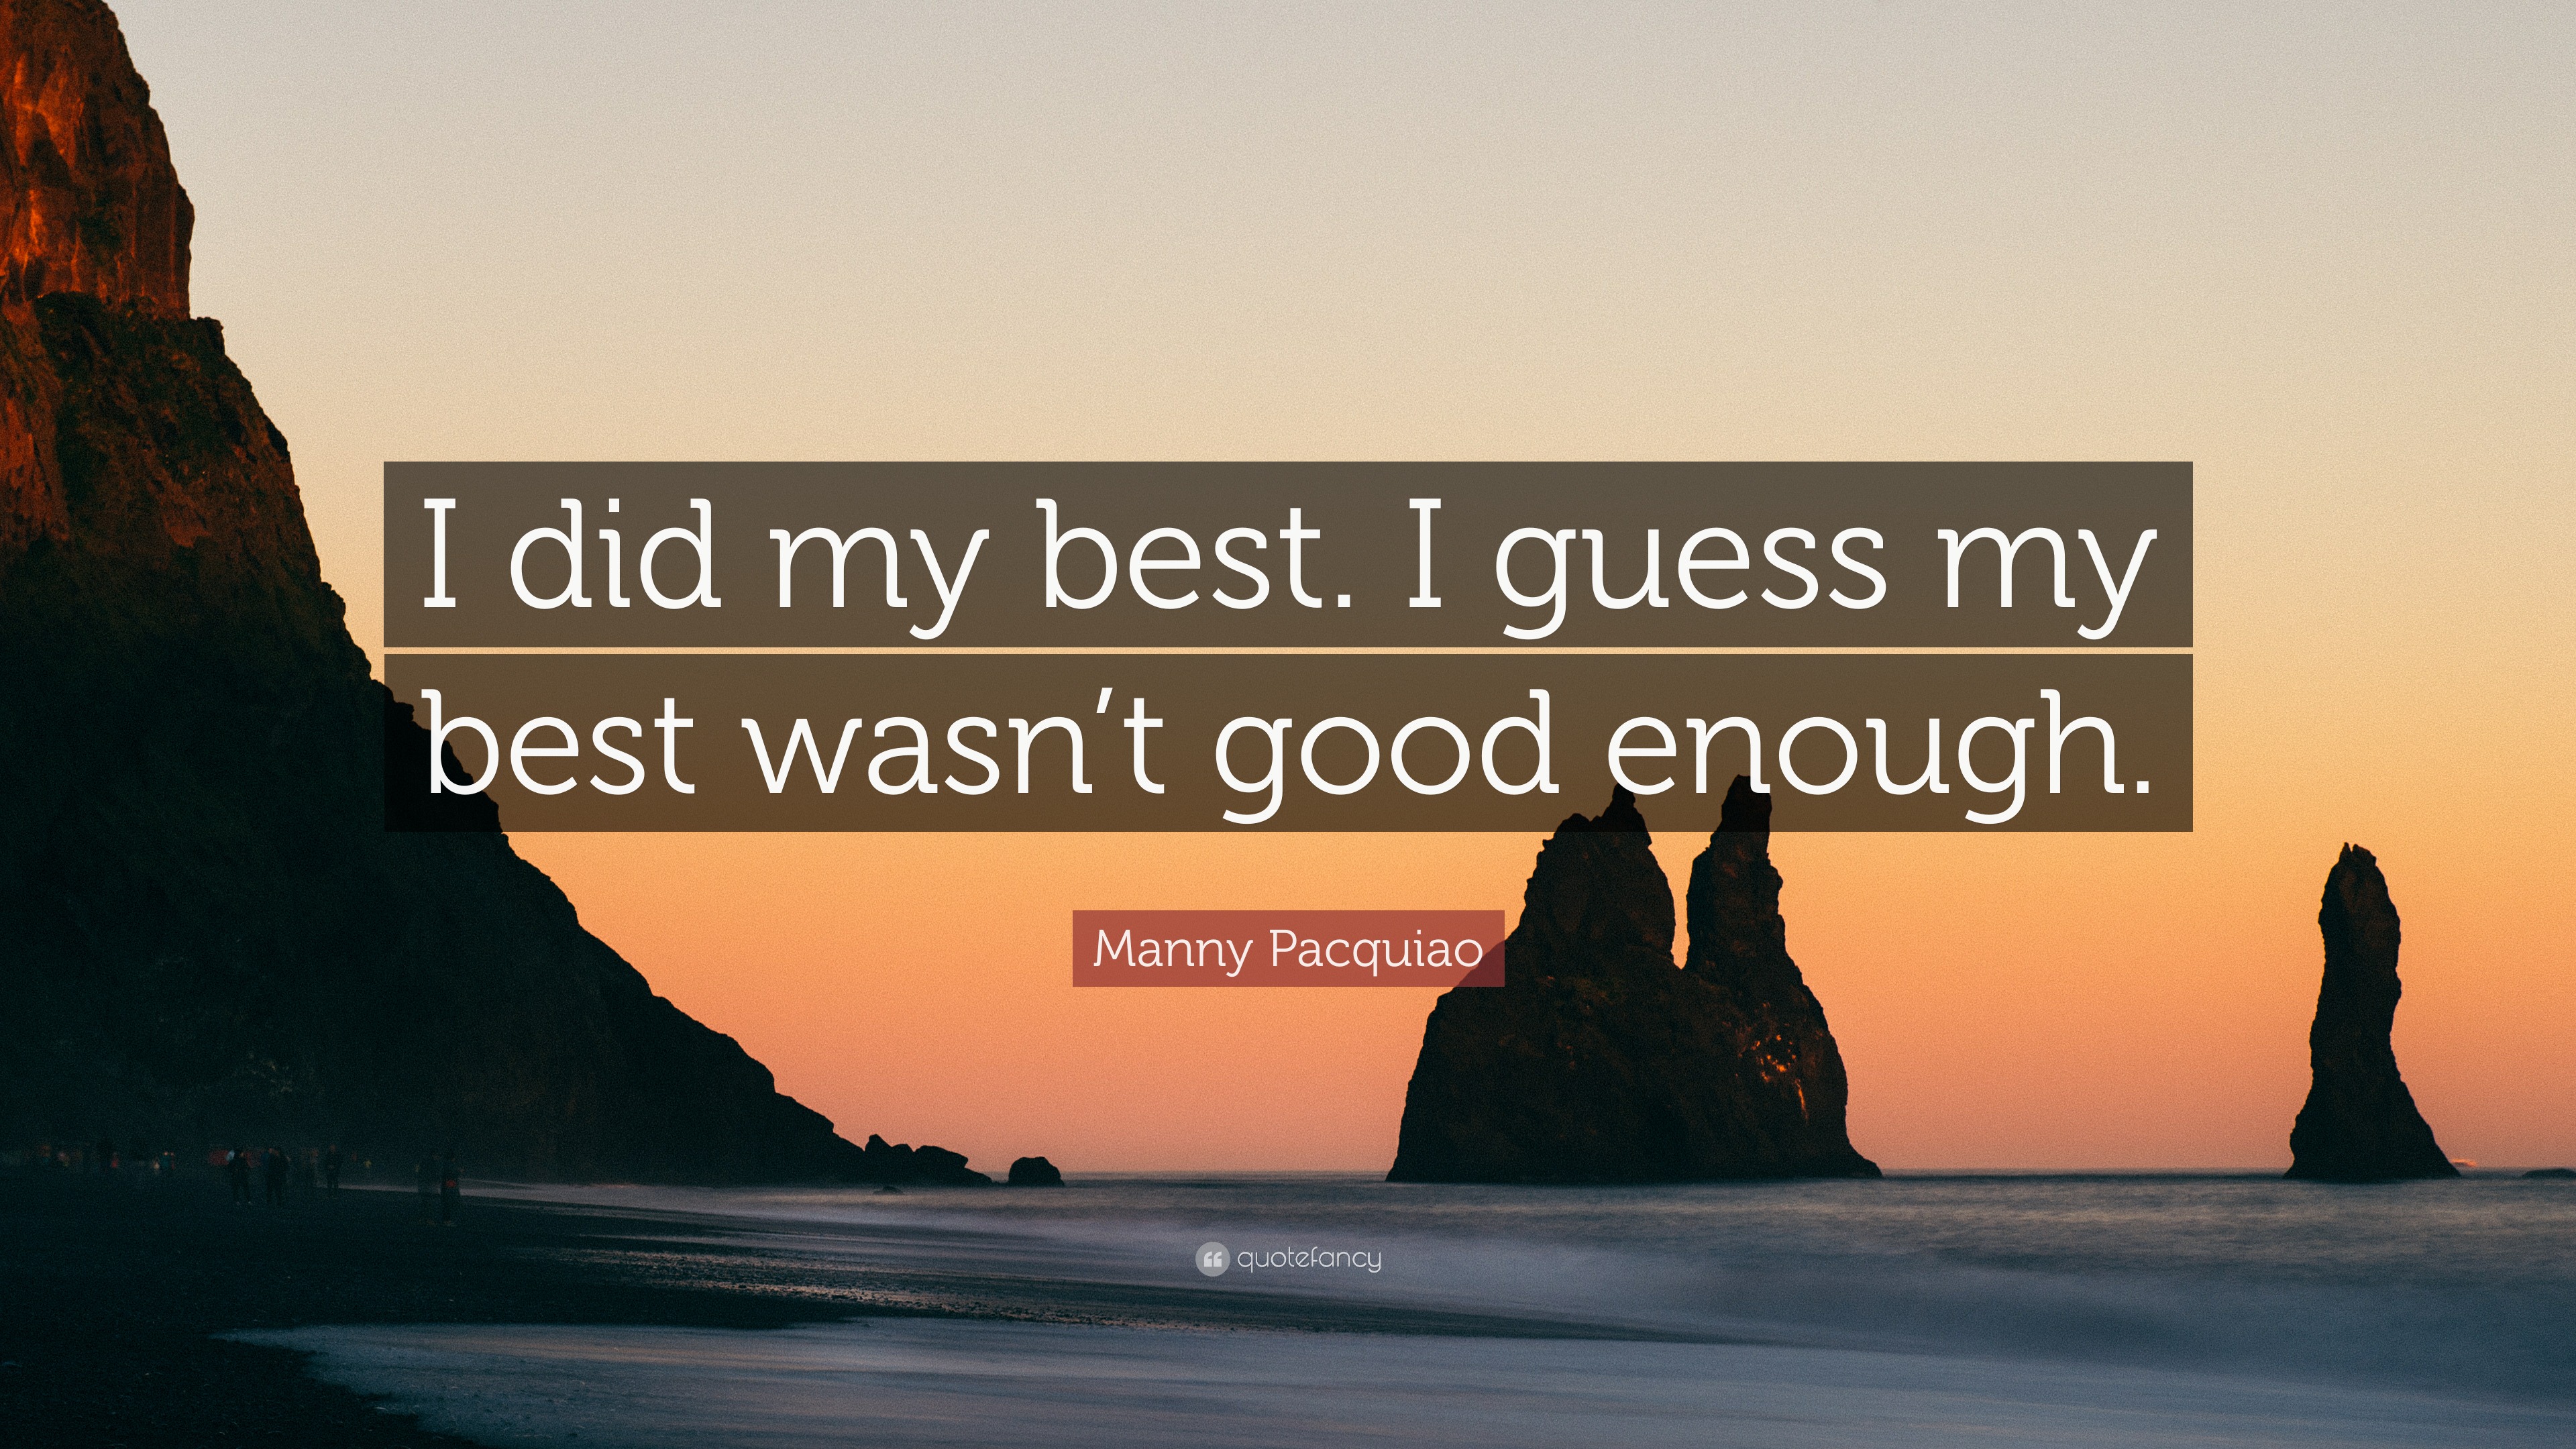 Manny Pacquiao Quote: “I did my I guess my best wasn't good enough.”